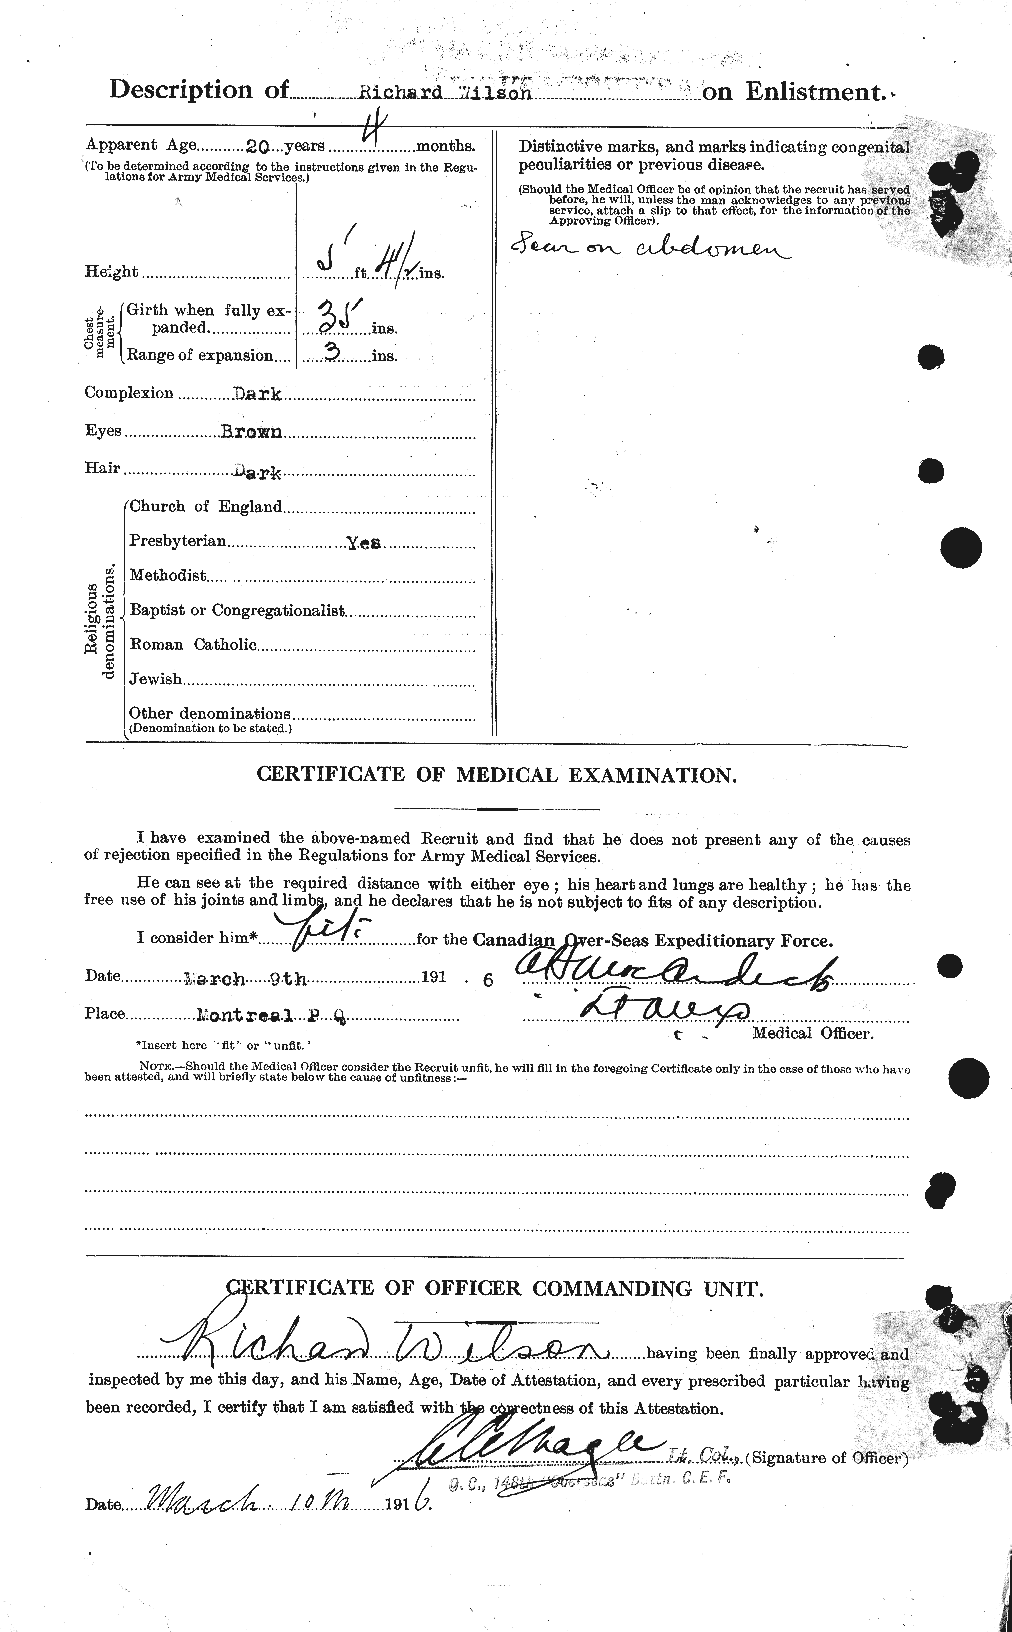 Personnel Records of the First World War - CEF 678837b